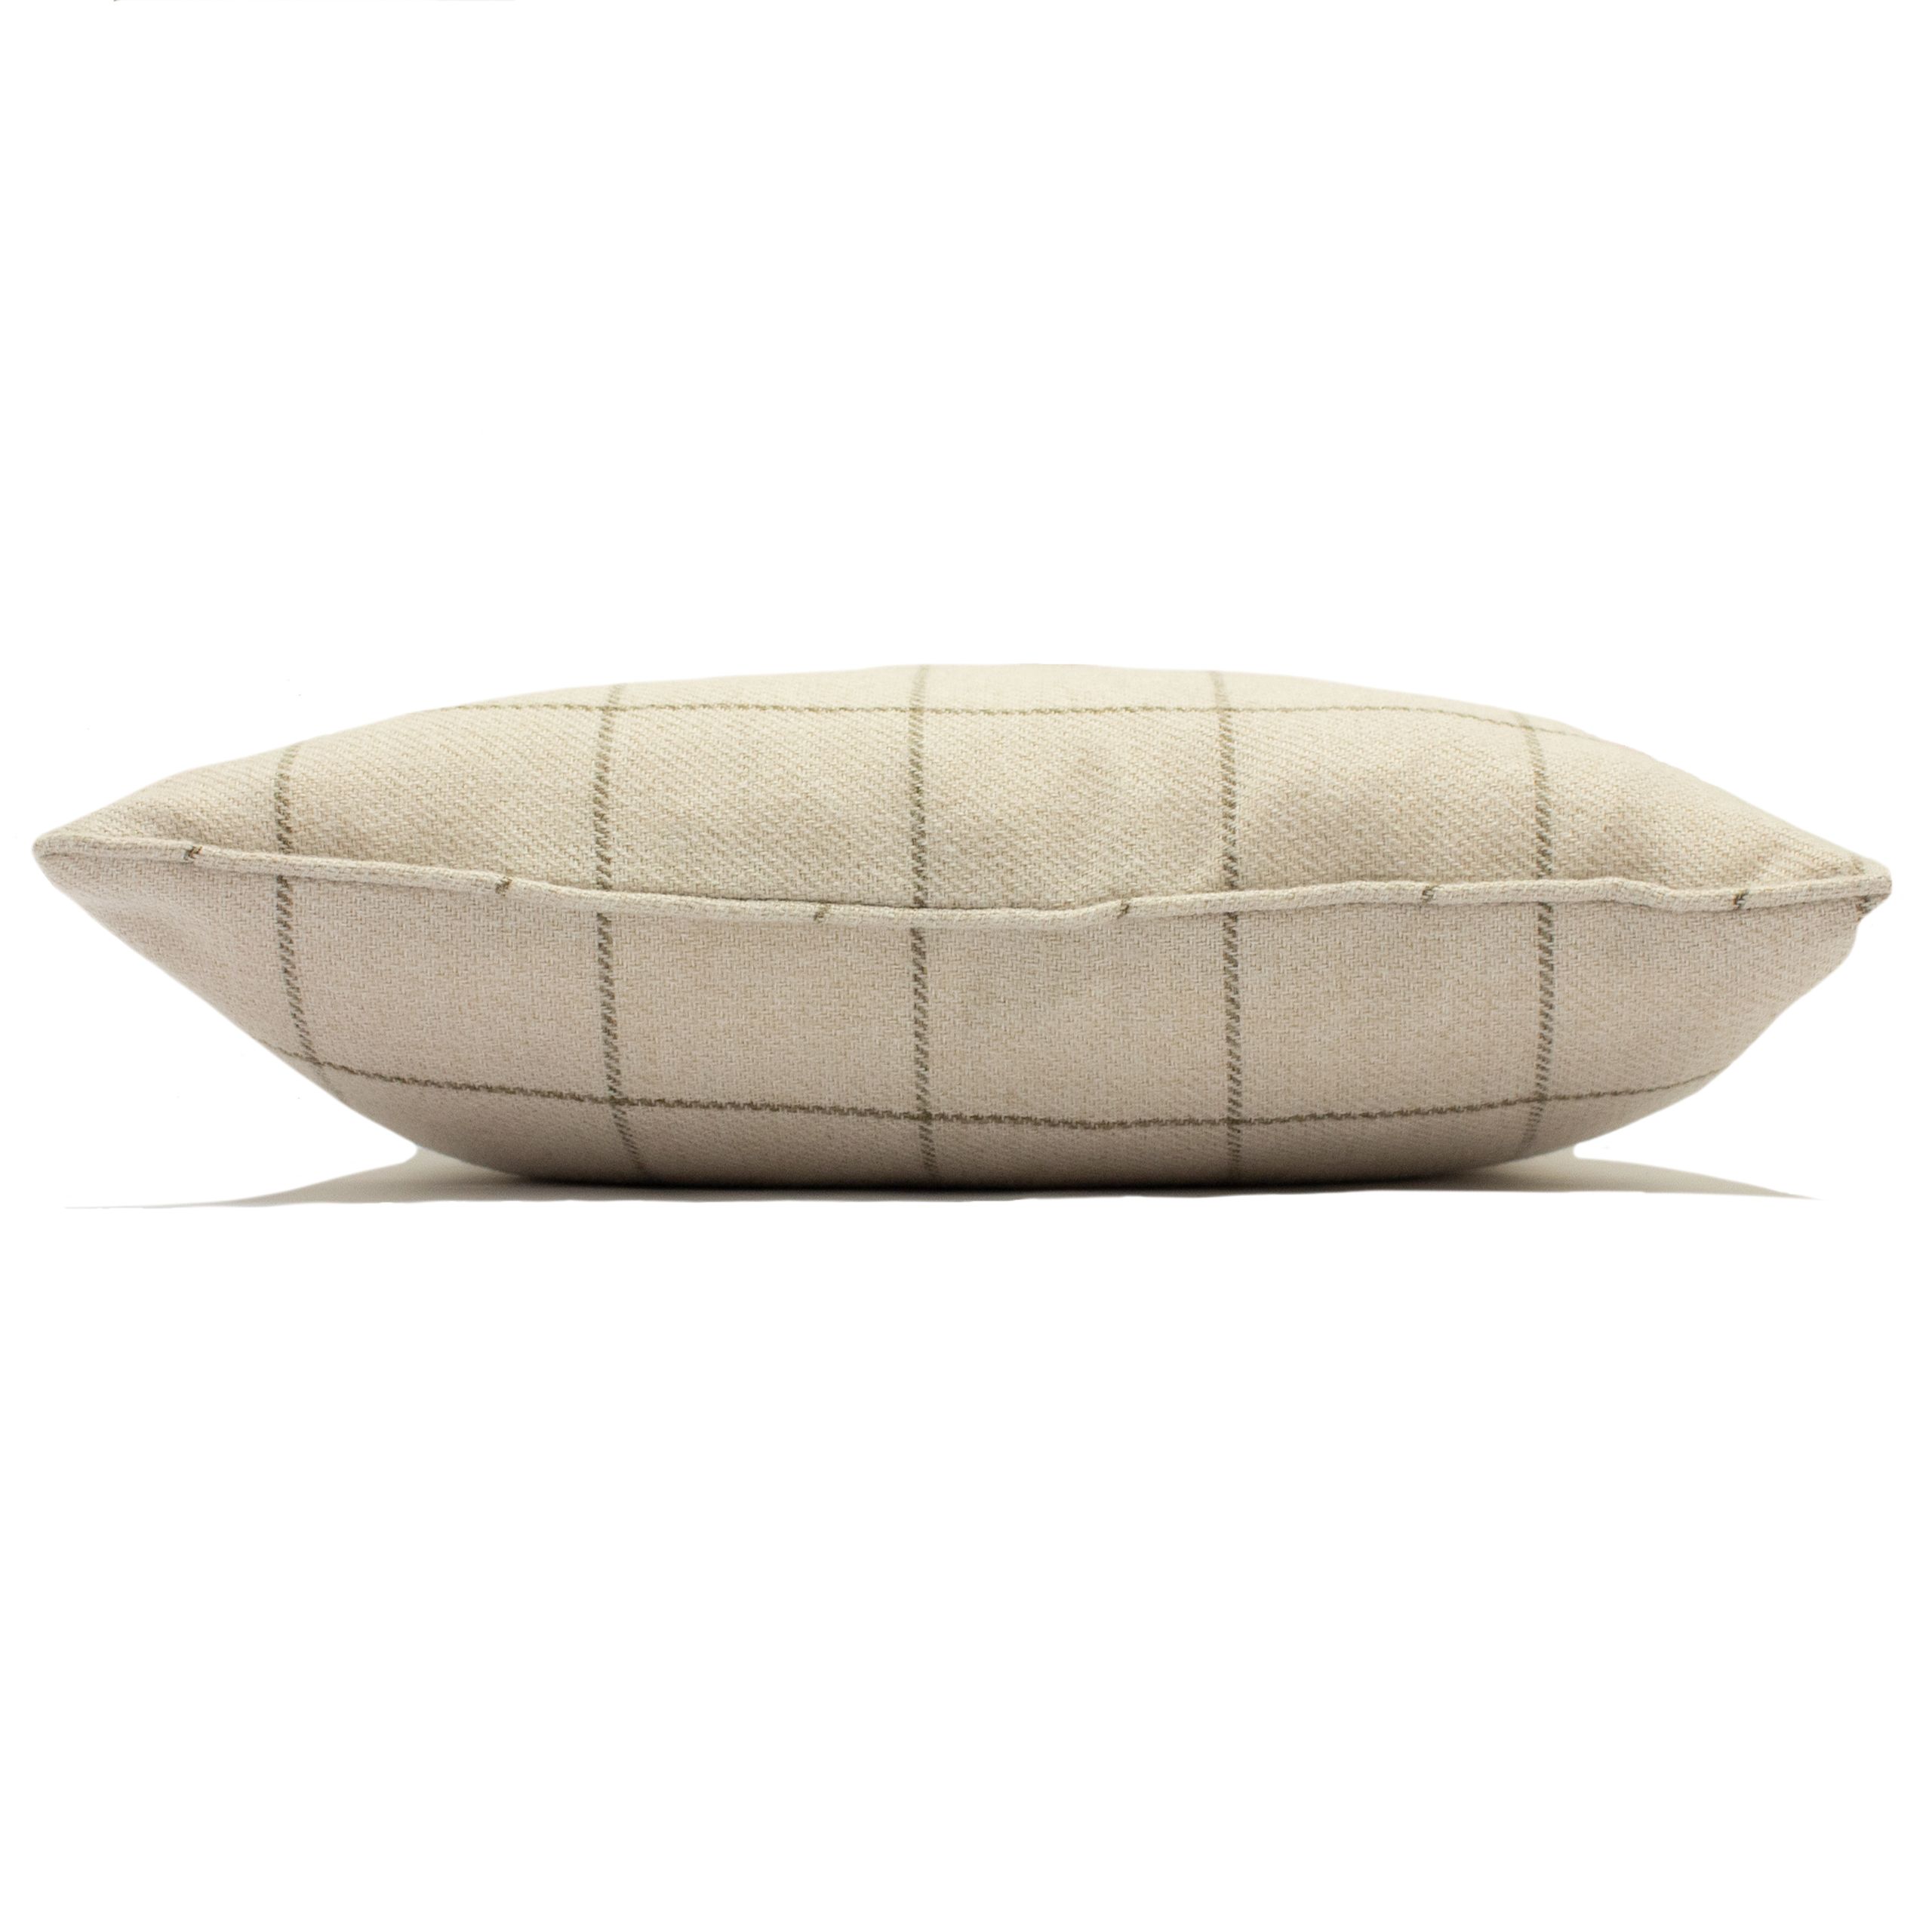 Add a cosy yet contemporary look to your décor with this modern and classic cushion. Made with a luxurious wool-like woven fabric, this matching reversible design is certainly a timeless choice. The woven-fabric design holds outstanding durability and wrinkle resistance as well as having strong rustic colours that will compliment any interior as well as bed, sofa or armchair.